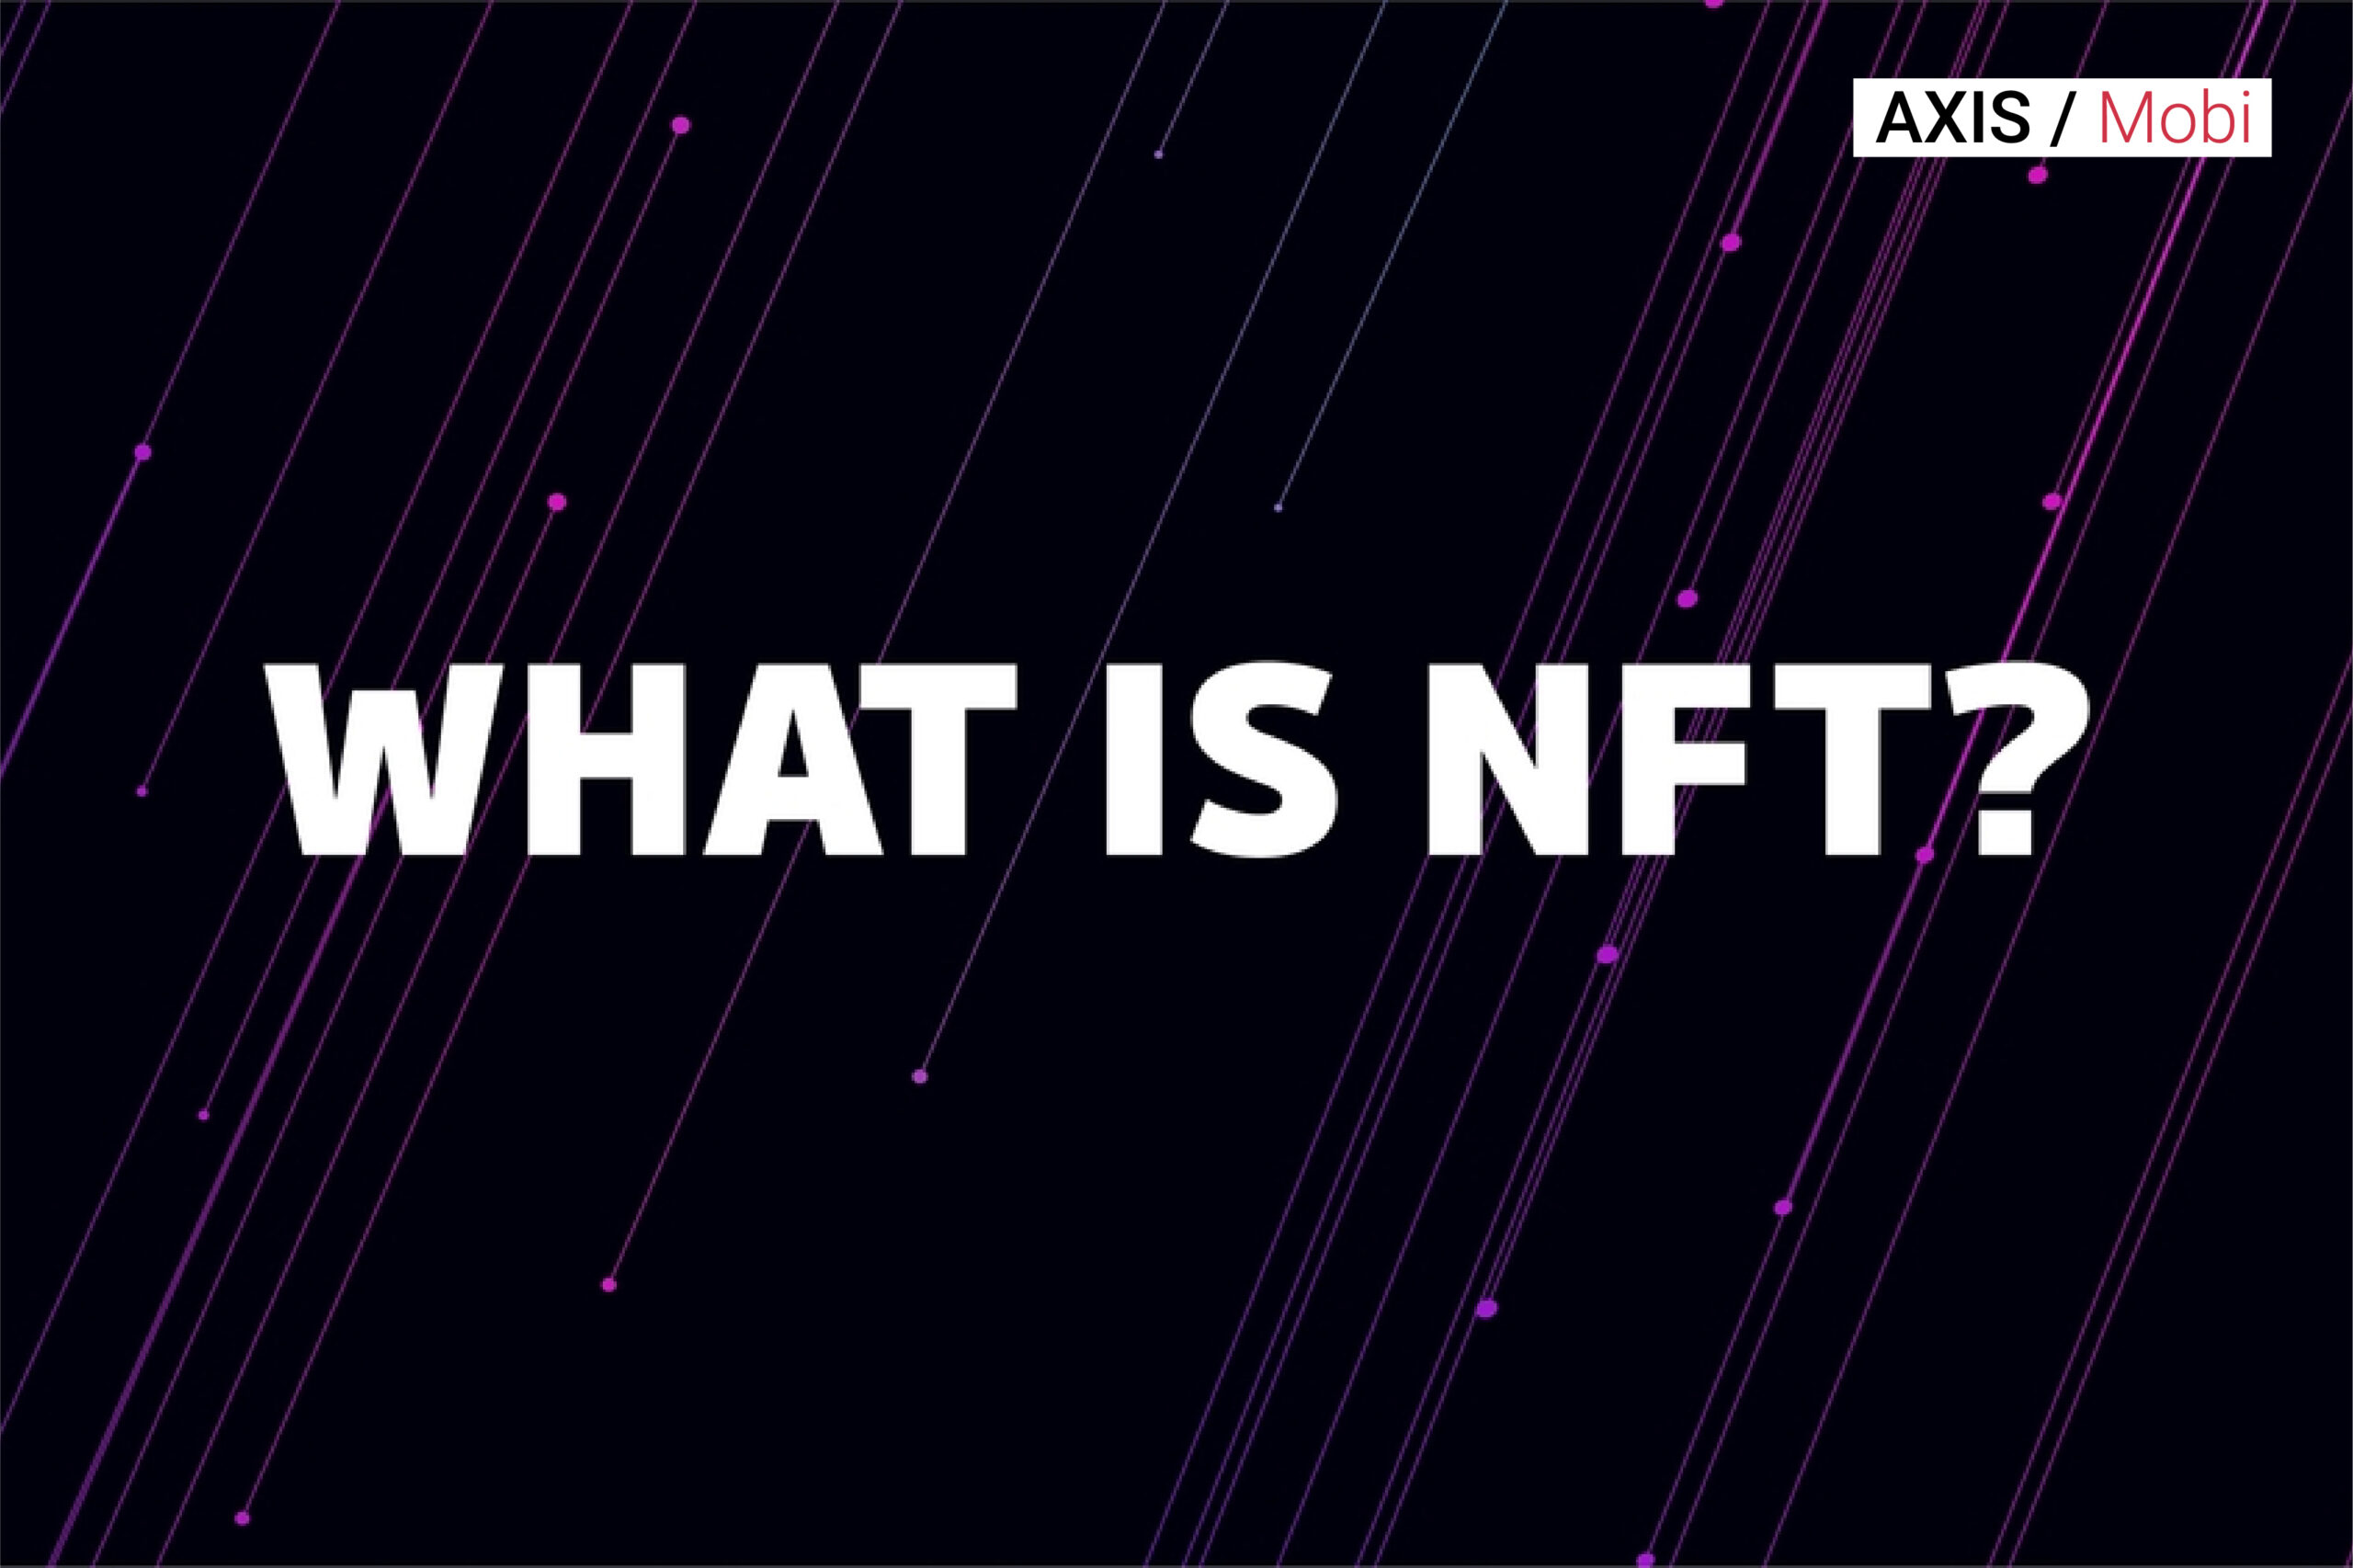 what is Non-Fungible Token (NFT)